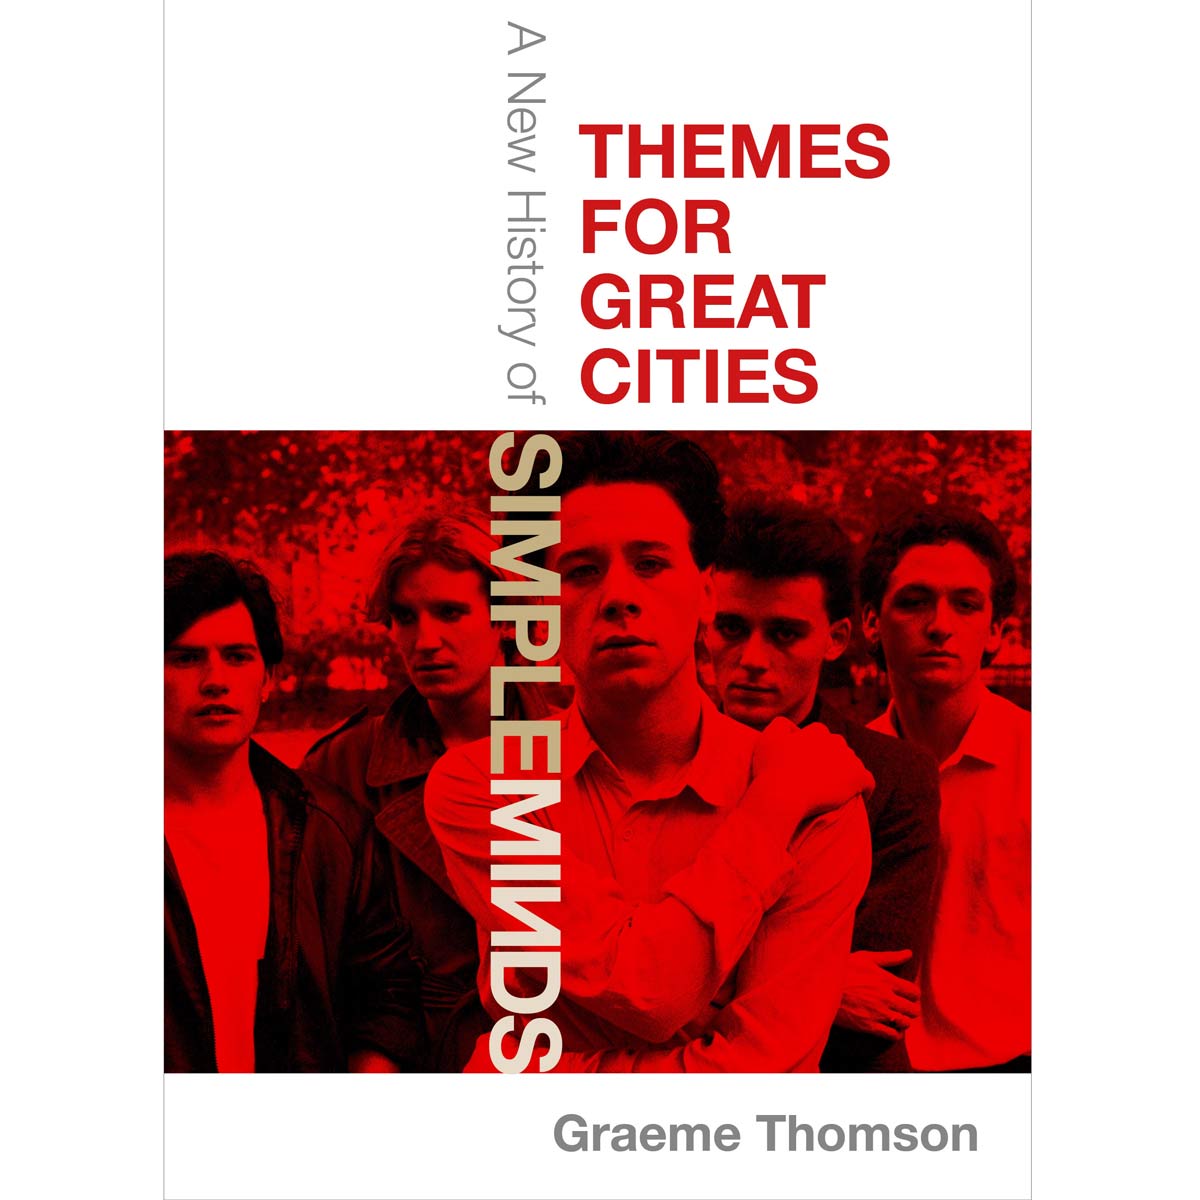 Themes For Great Cities Book - SIMPLEMINDS.COM